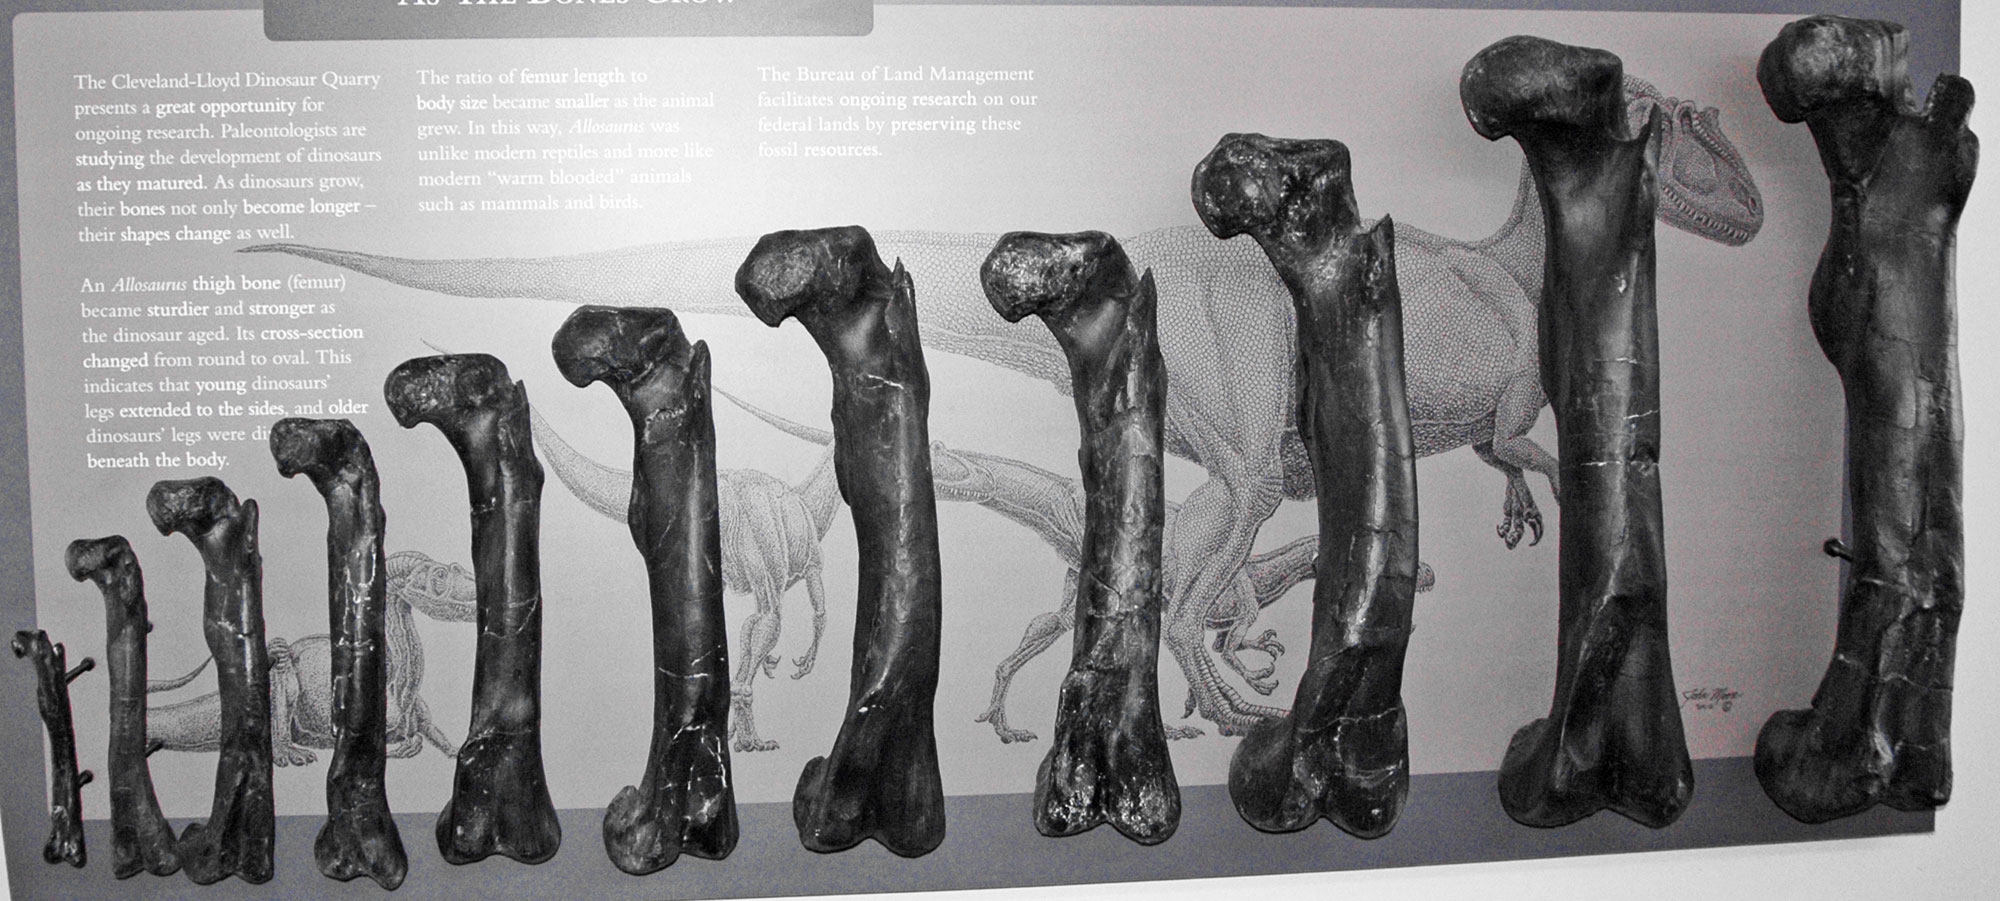 Photograph of a display at the Cleveland-Lloyd quarry in Utah. The display shows a line of Allosaurus femurs lined up from smallest to largest, illustrating the growth and development of the animal.